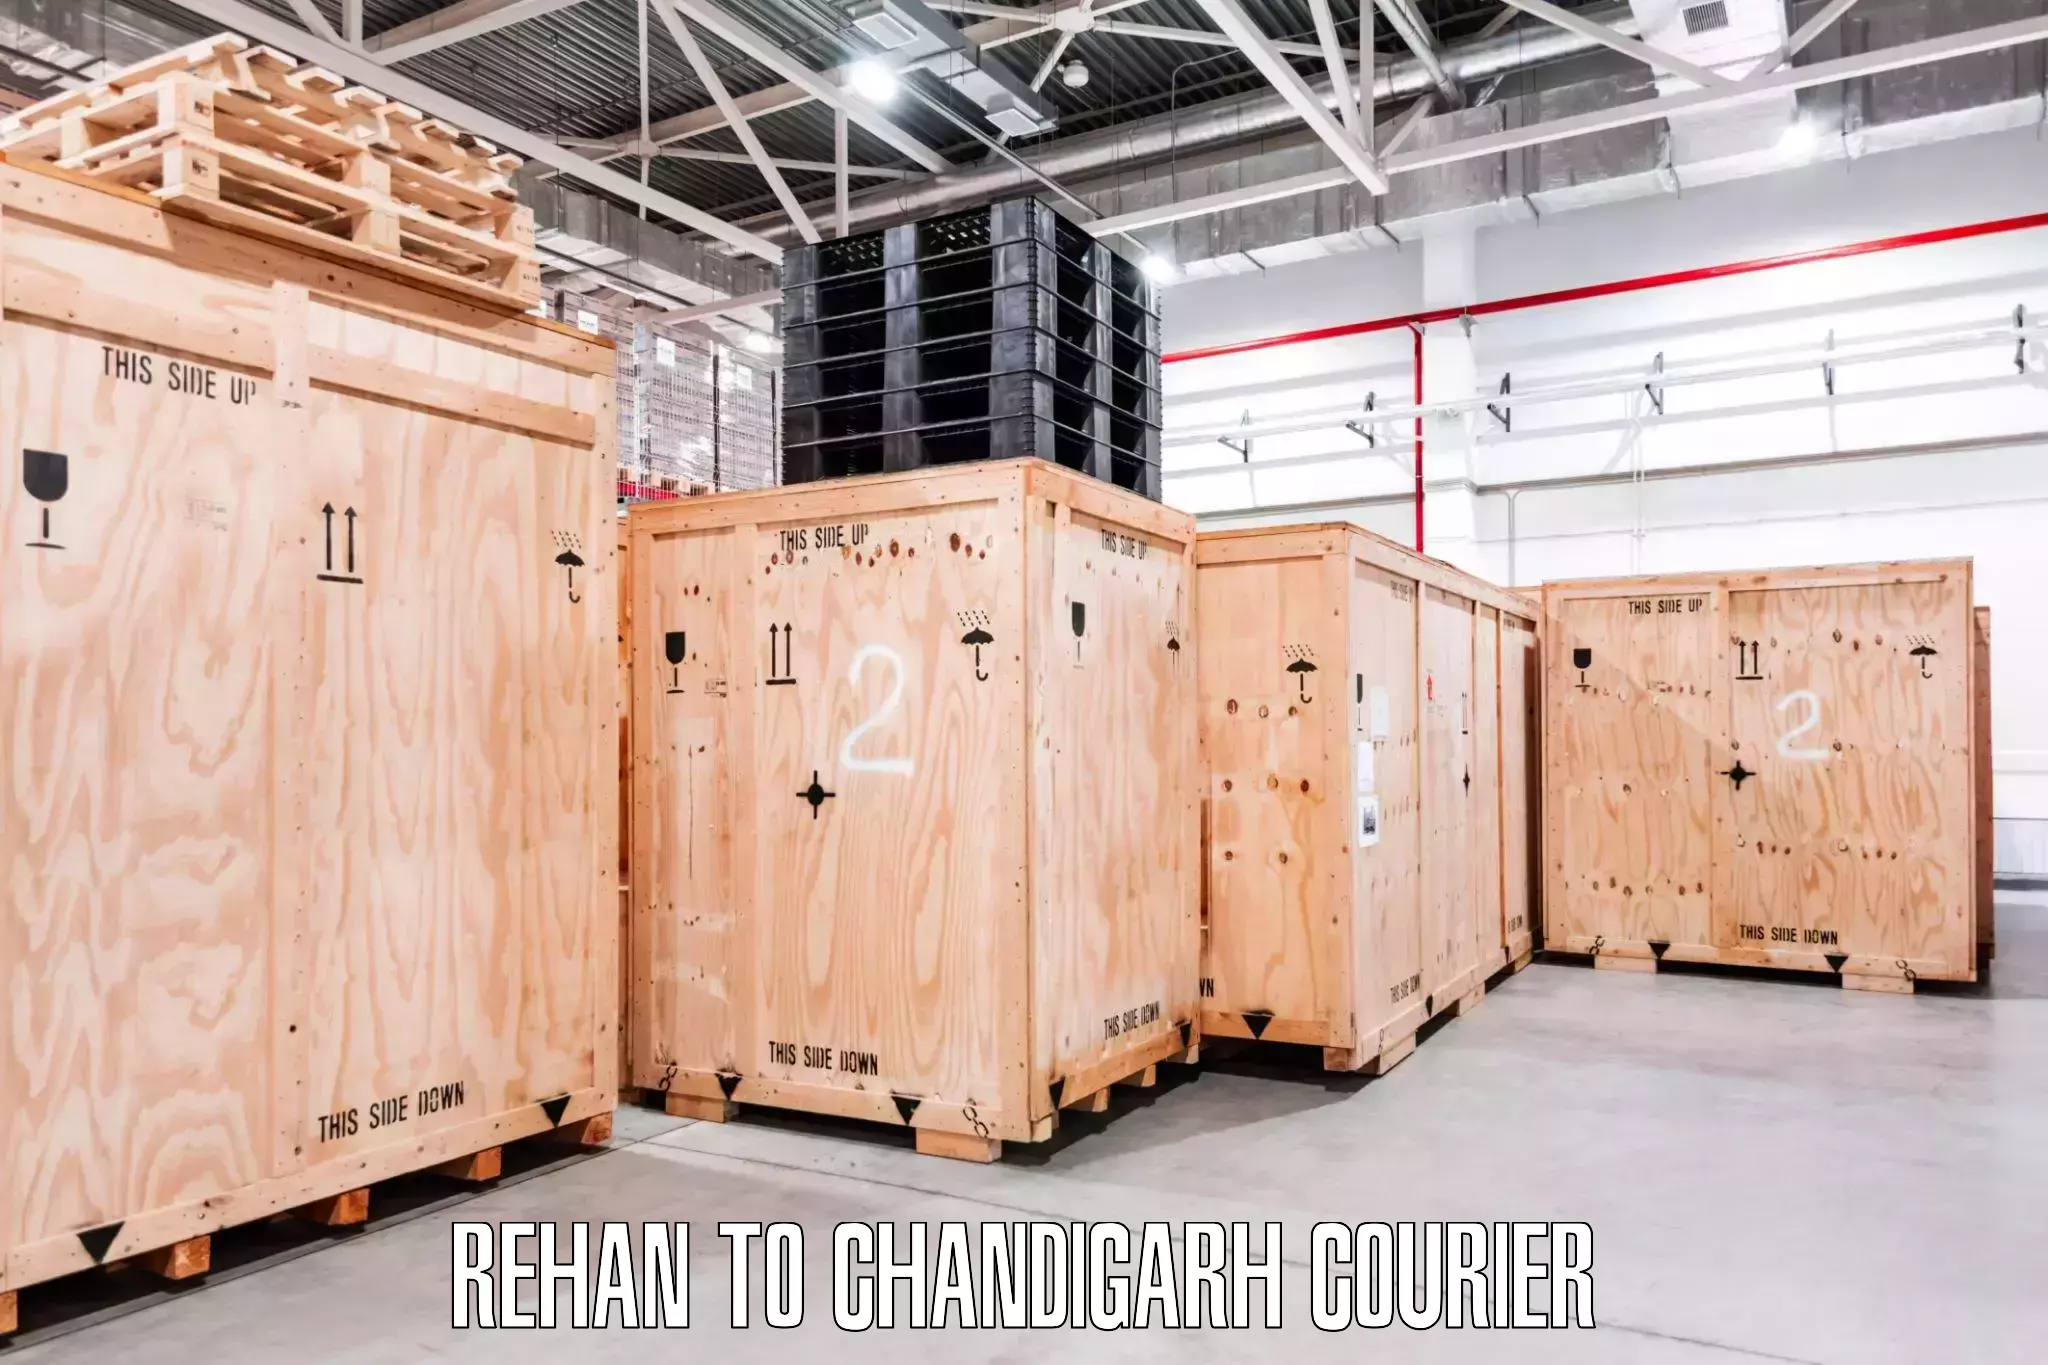 Furniture delivery service Rehan to Chandigarh